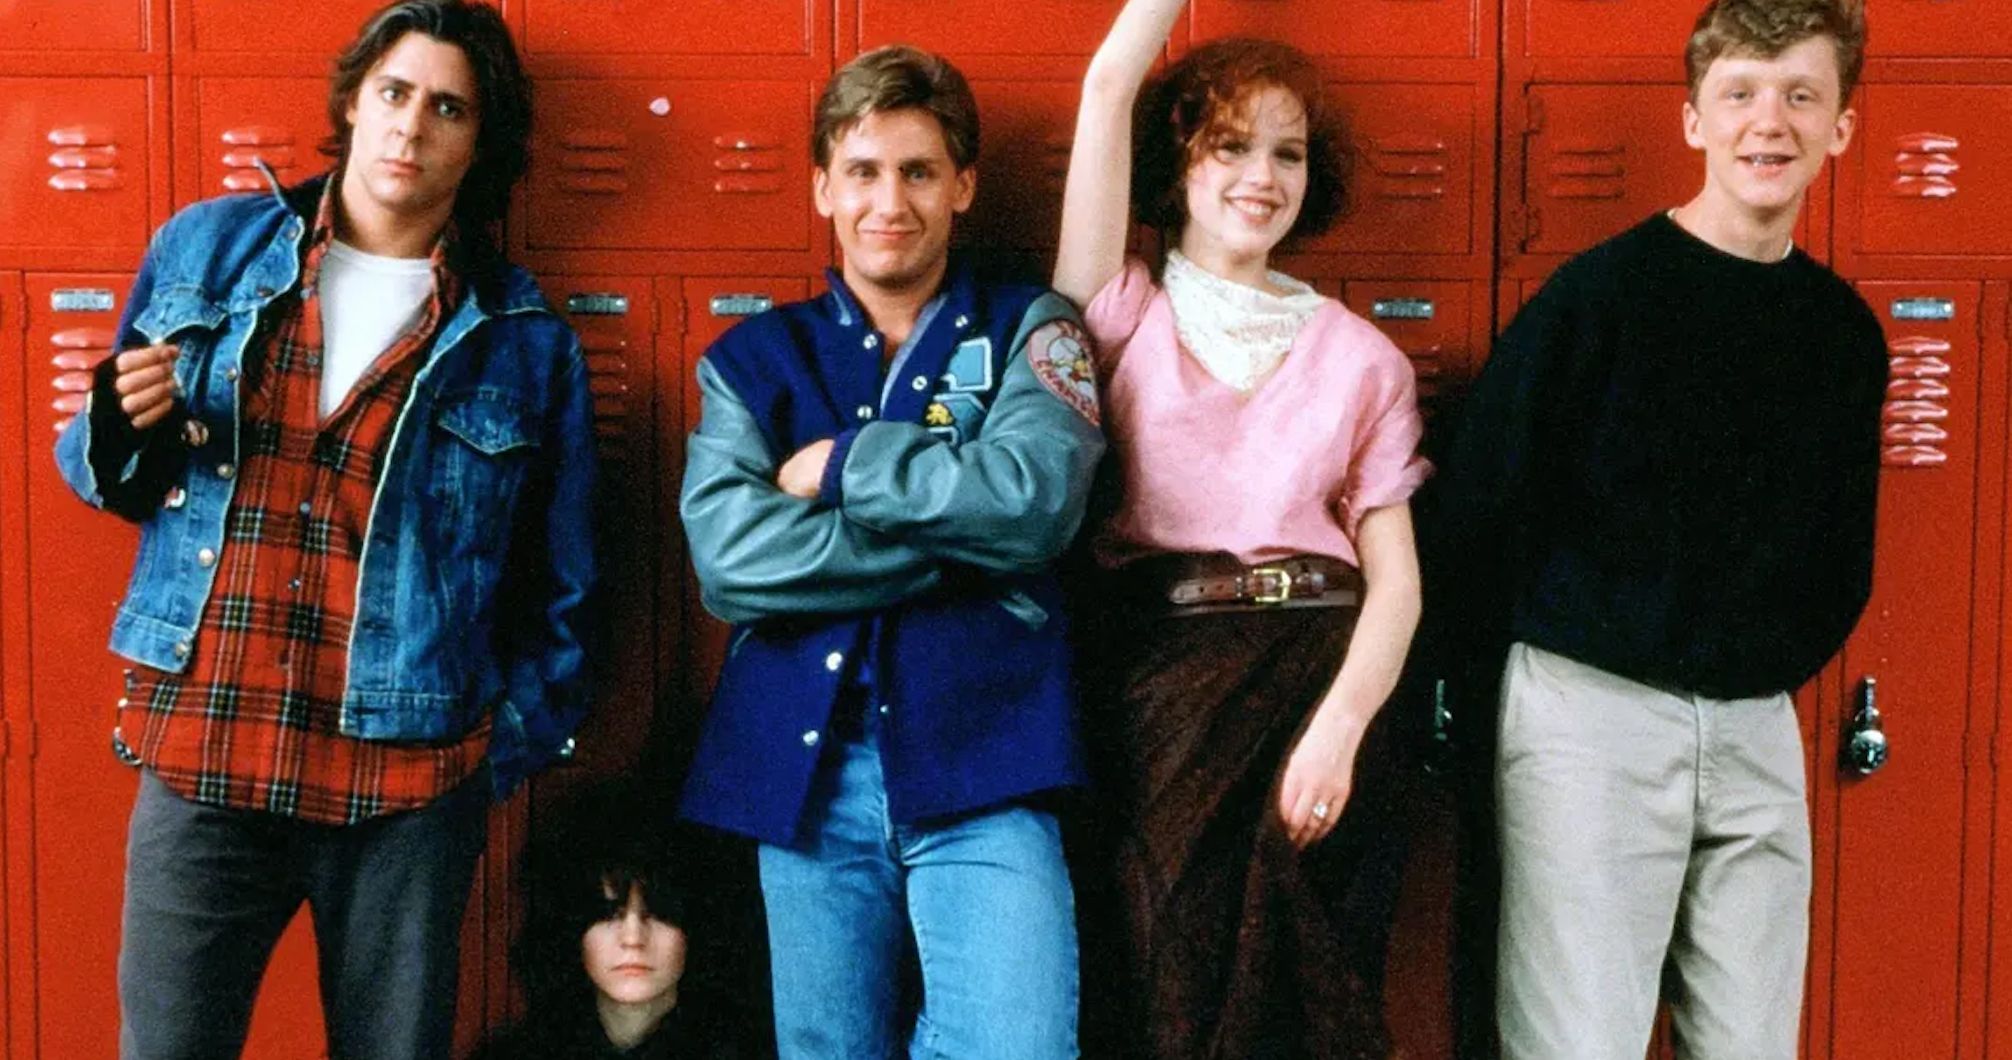 Here's Where the Cast from The Breakfast Club Is Today